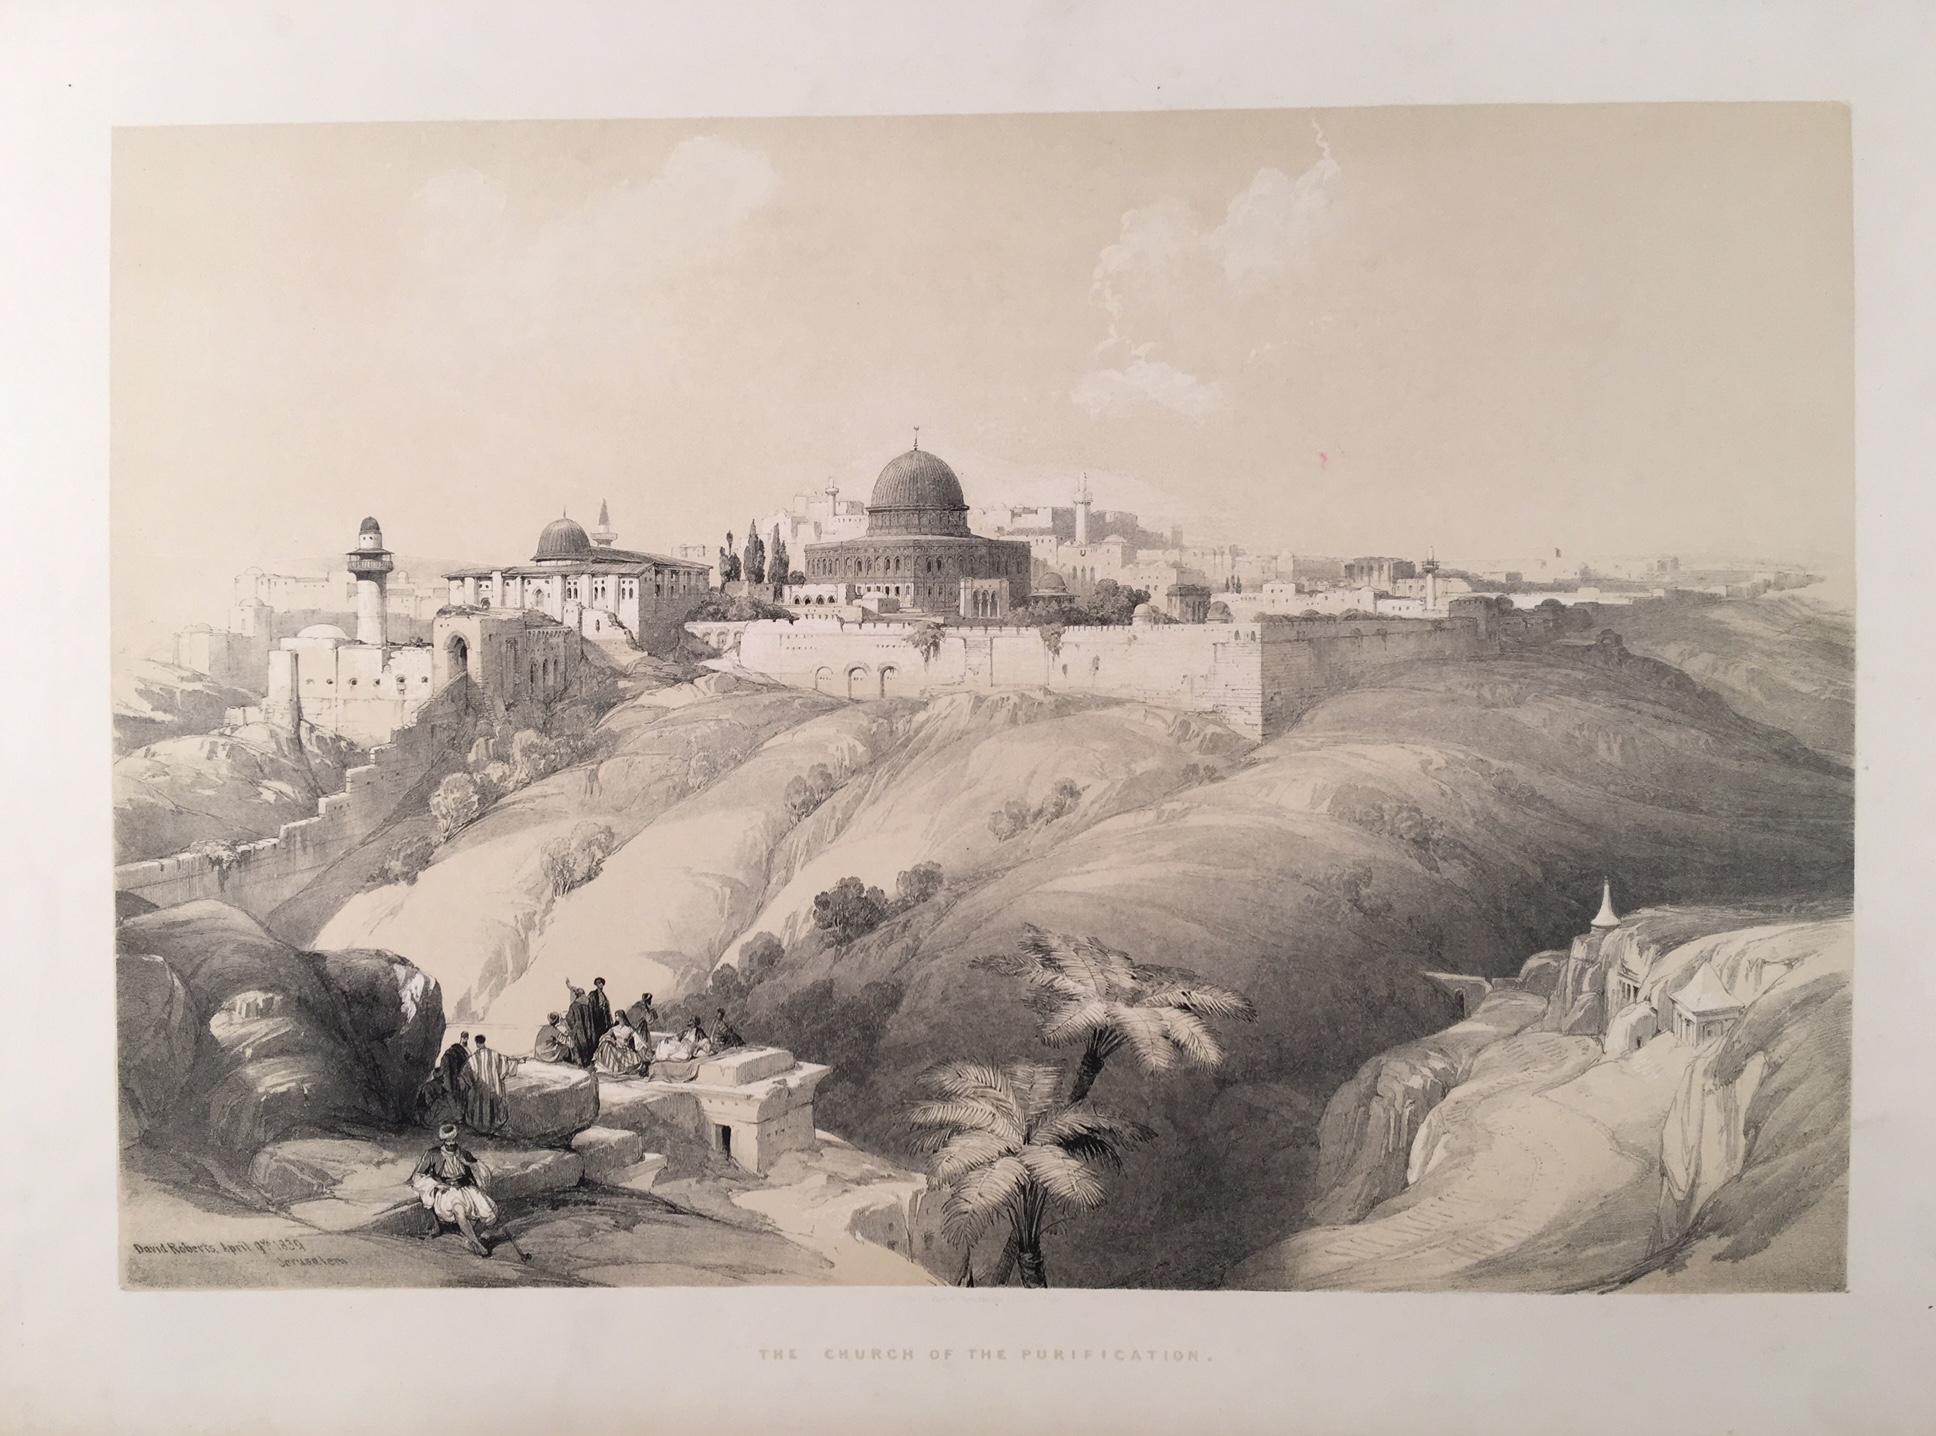 David Roberts Landscape Print - The Church of the Purification (and the Wailing Wall)